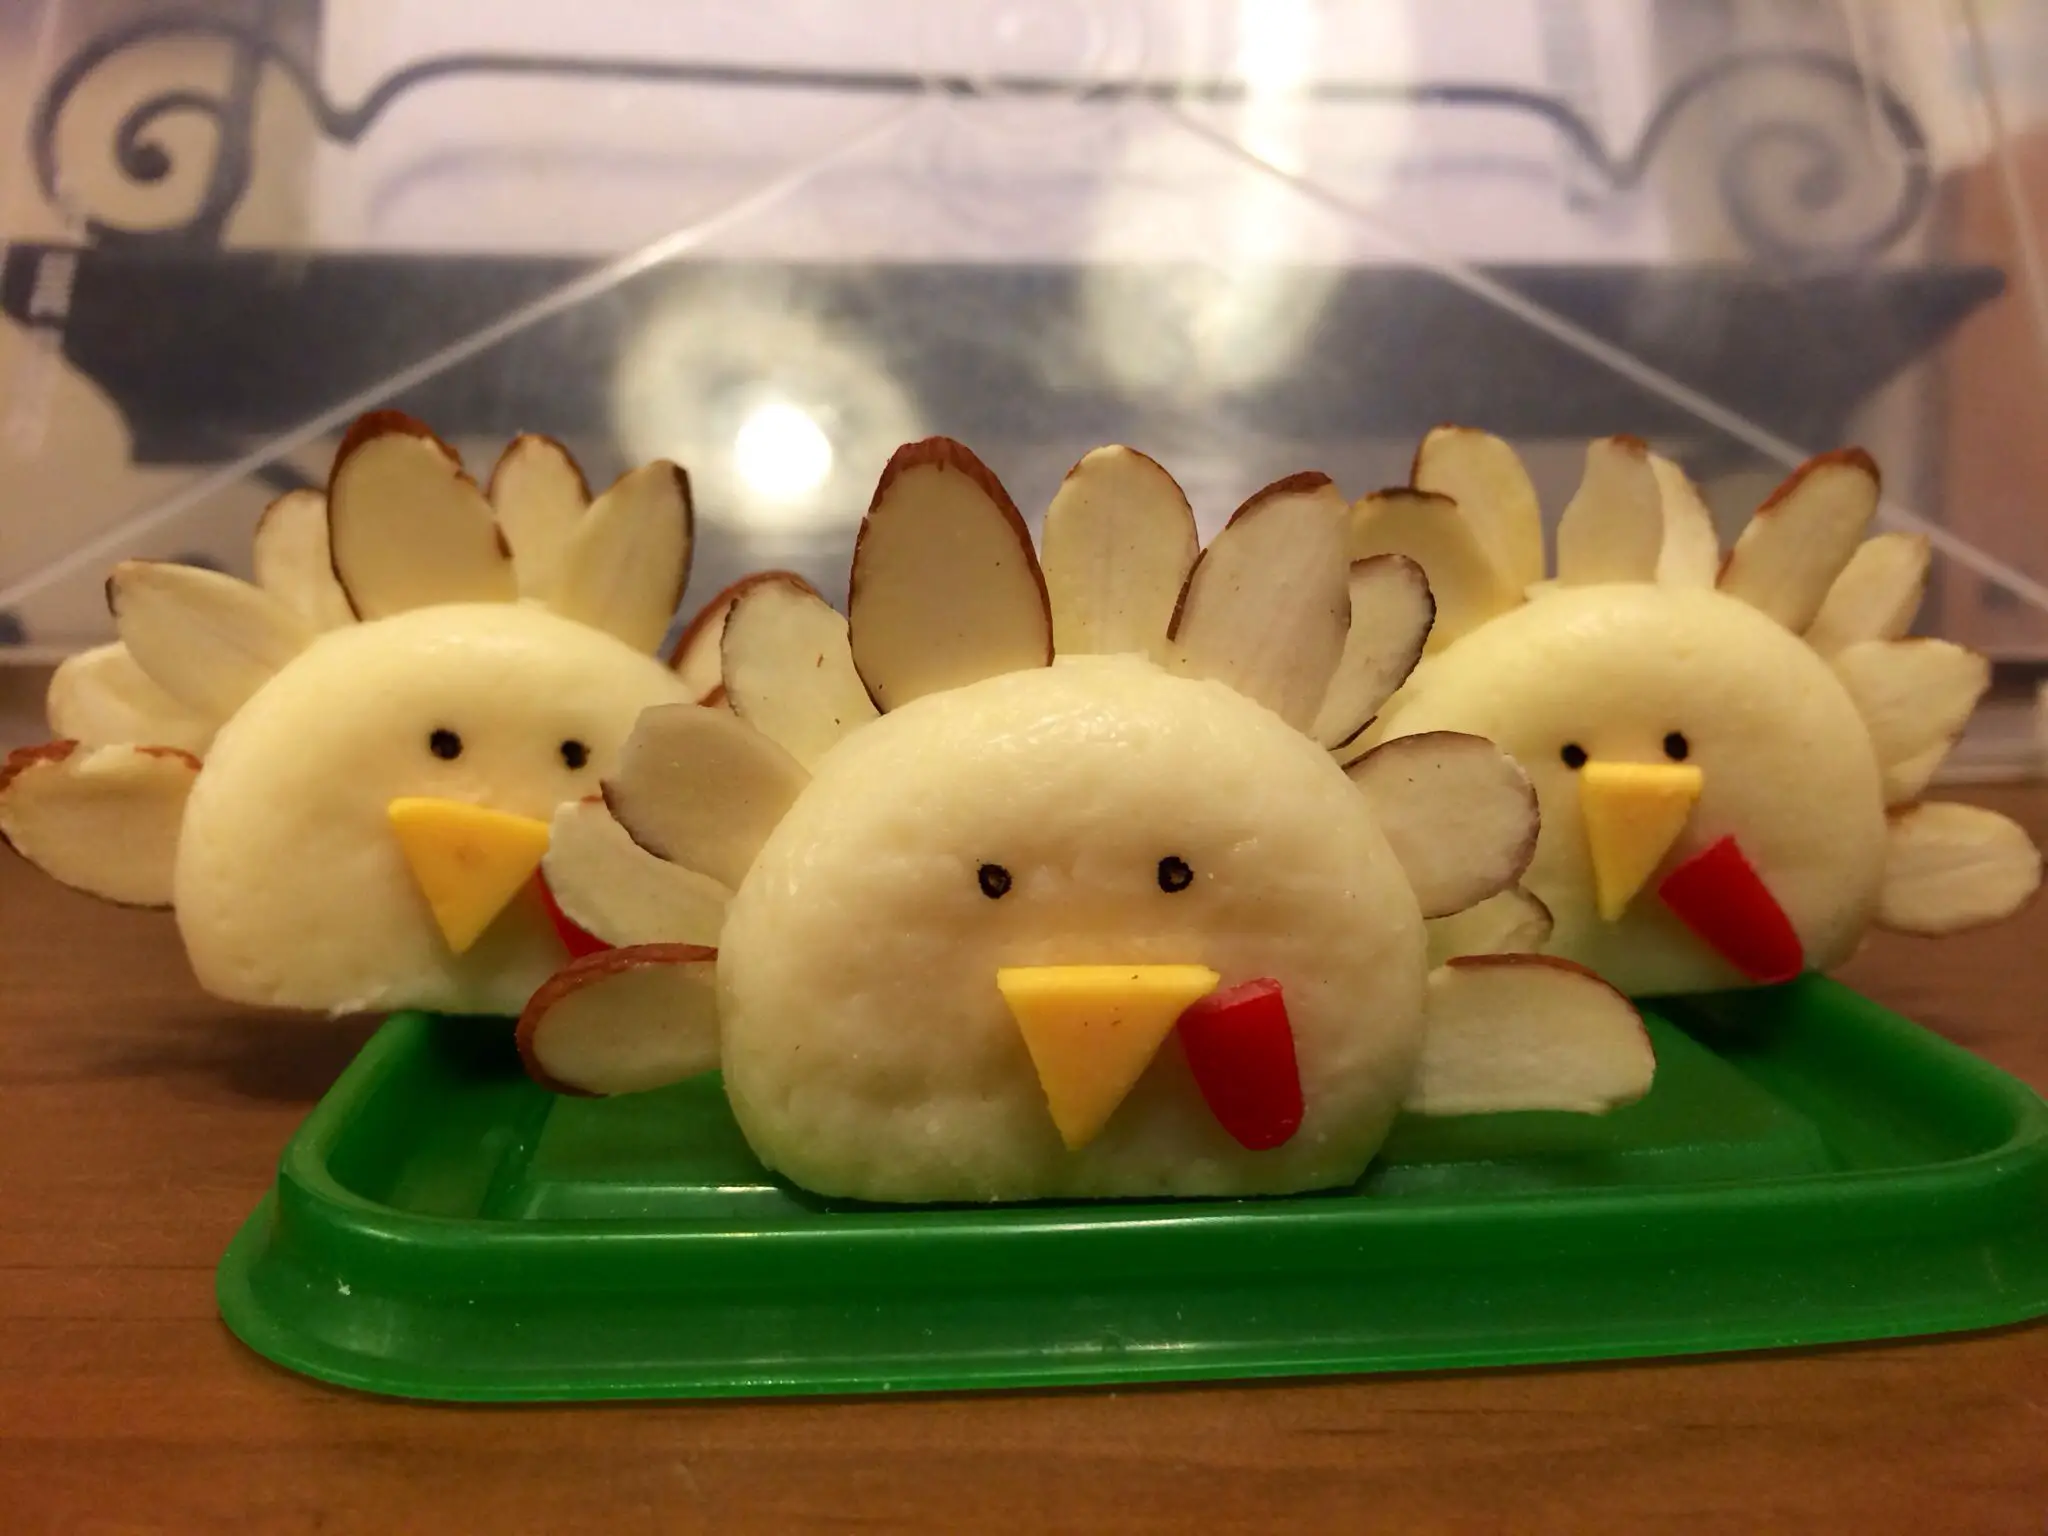 Turkey cheese snacks! Made with Babybel cheese, American ...